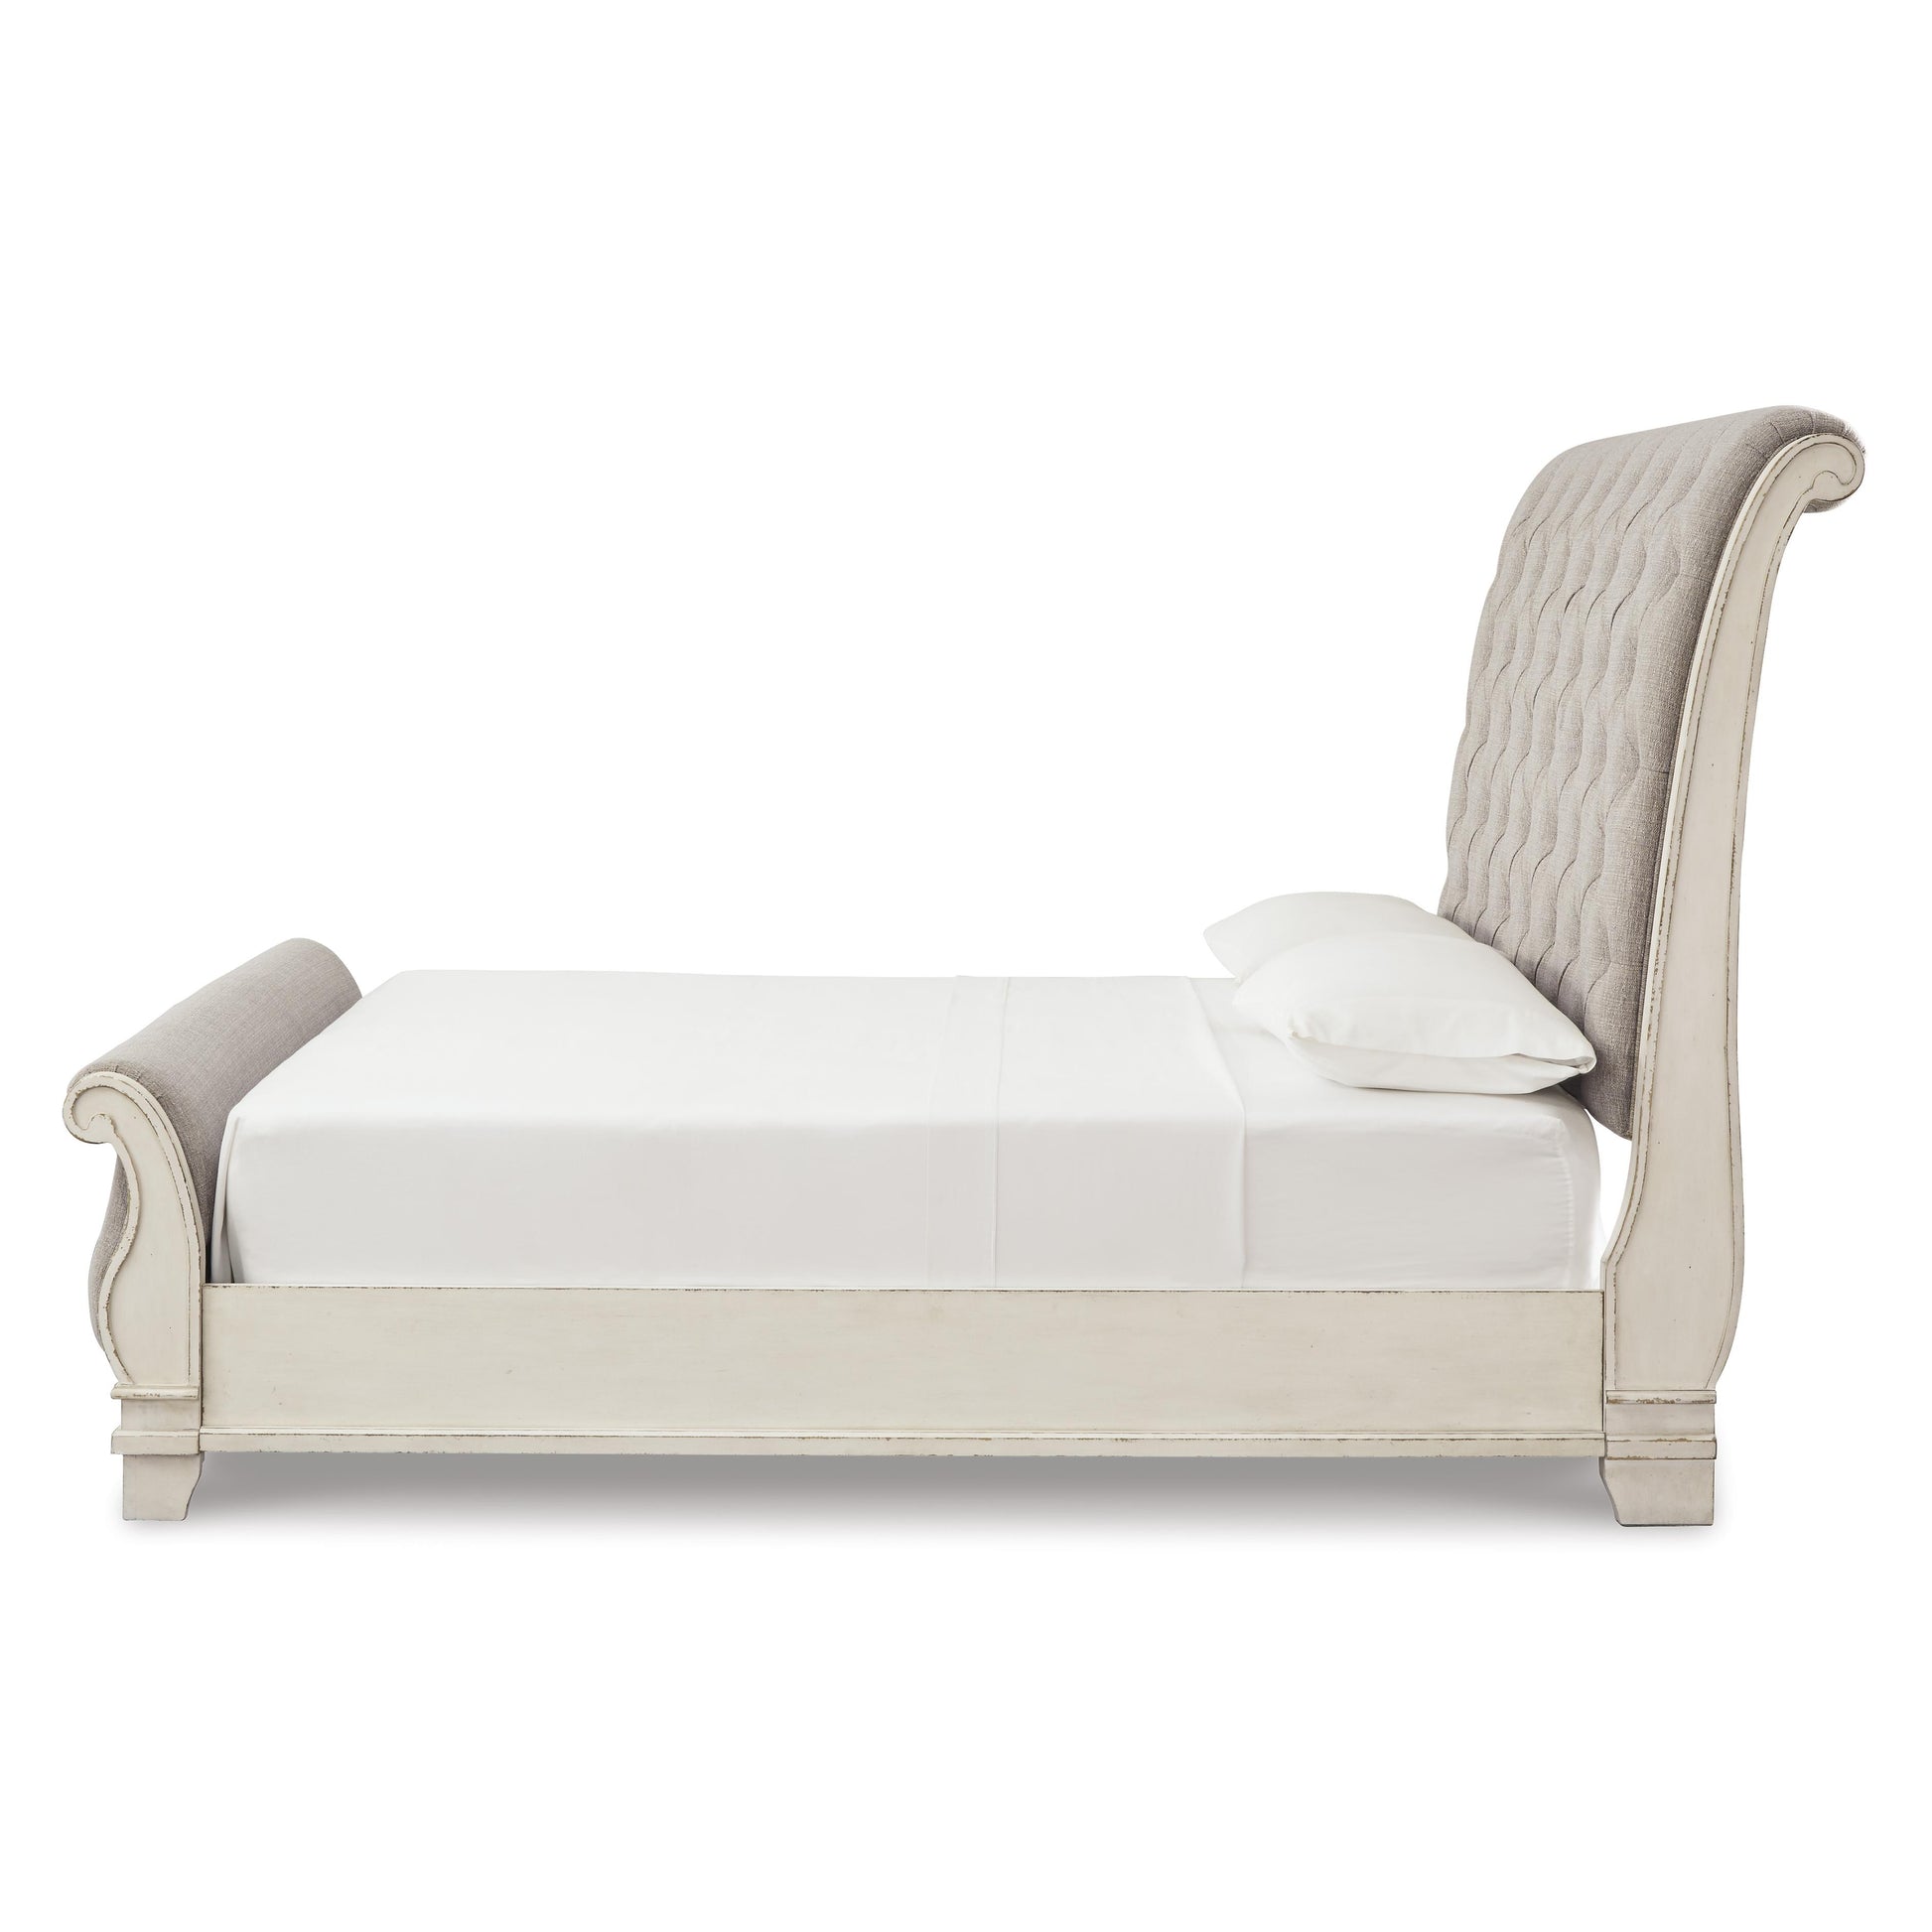 Signature Design by Ashley Realyn Queen Upholstered Sleigh Bed B743-77/B743-74/B743-98 IMAGE 3